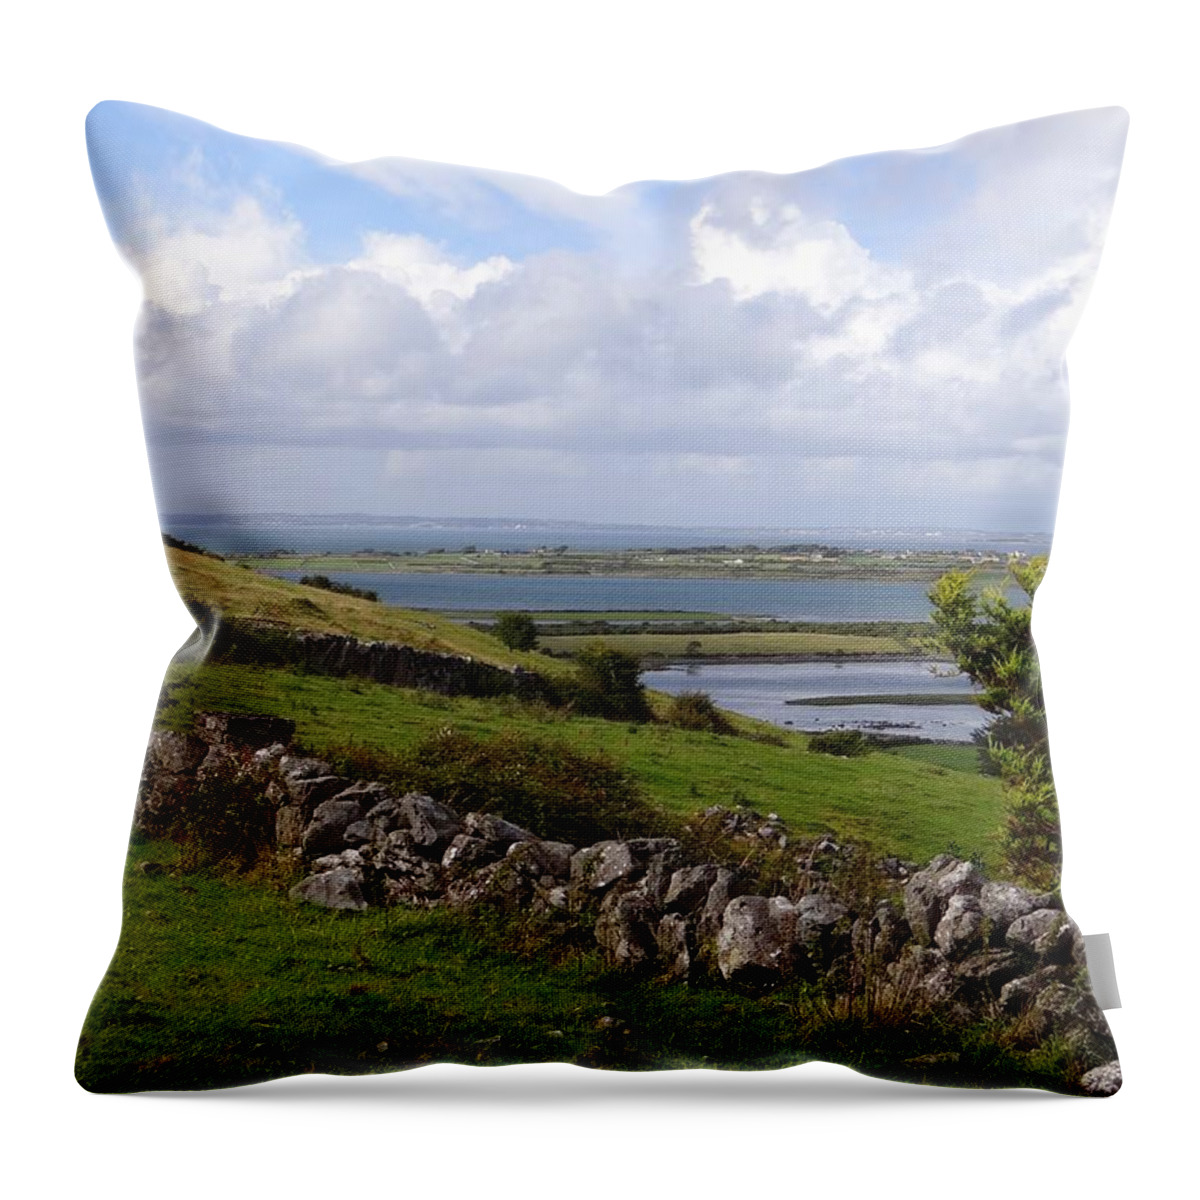 Galway Bay Throw Pillow featuring the photograph Galway Bay by Keith Stokes